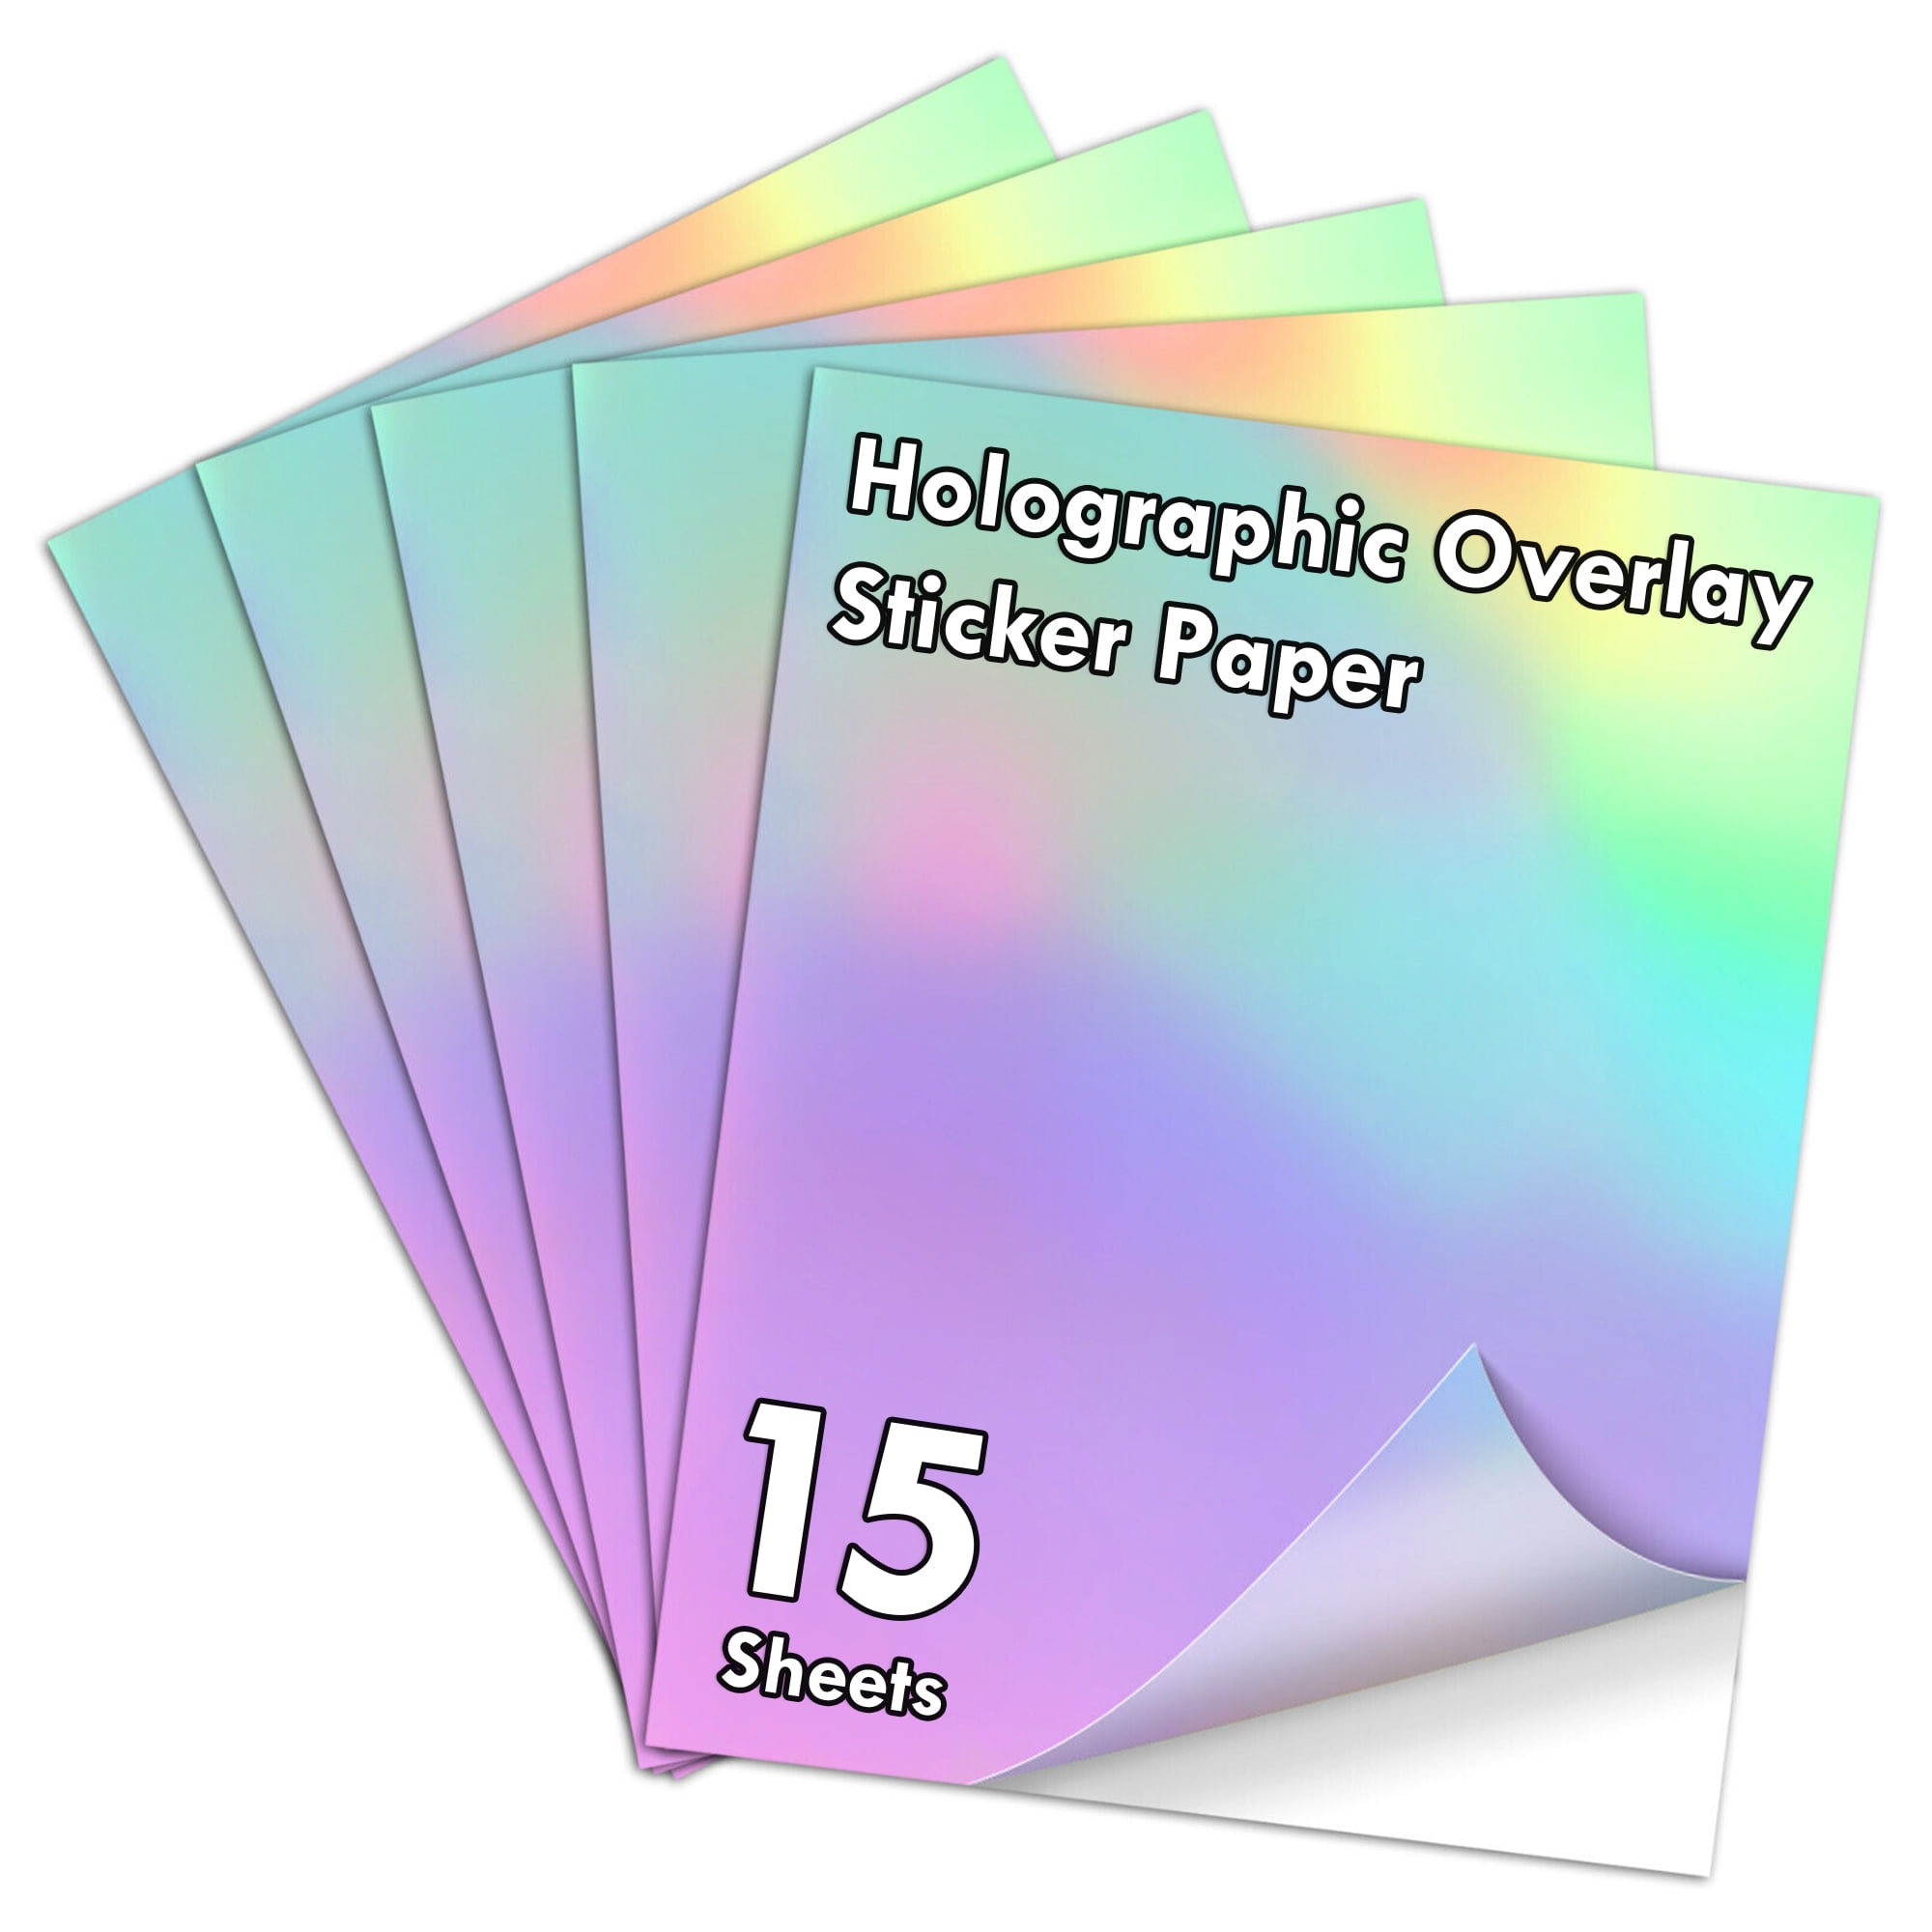 Koala Holographic Sticker Paper Clear RAINBOW Holographic Overlay